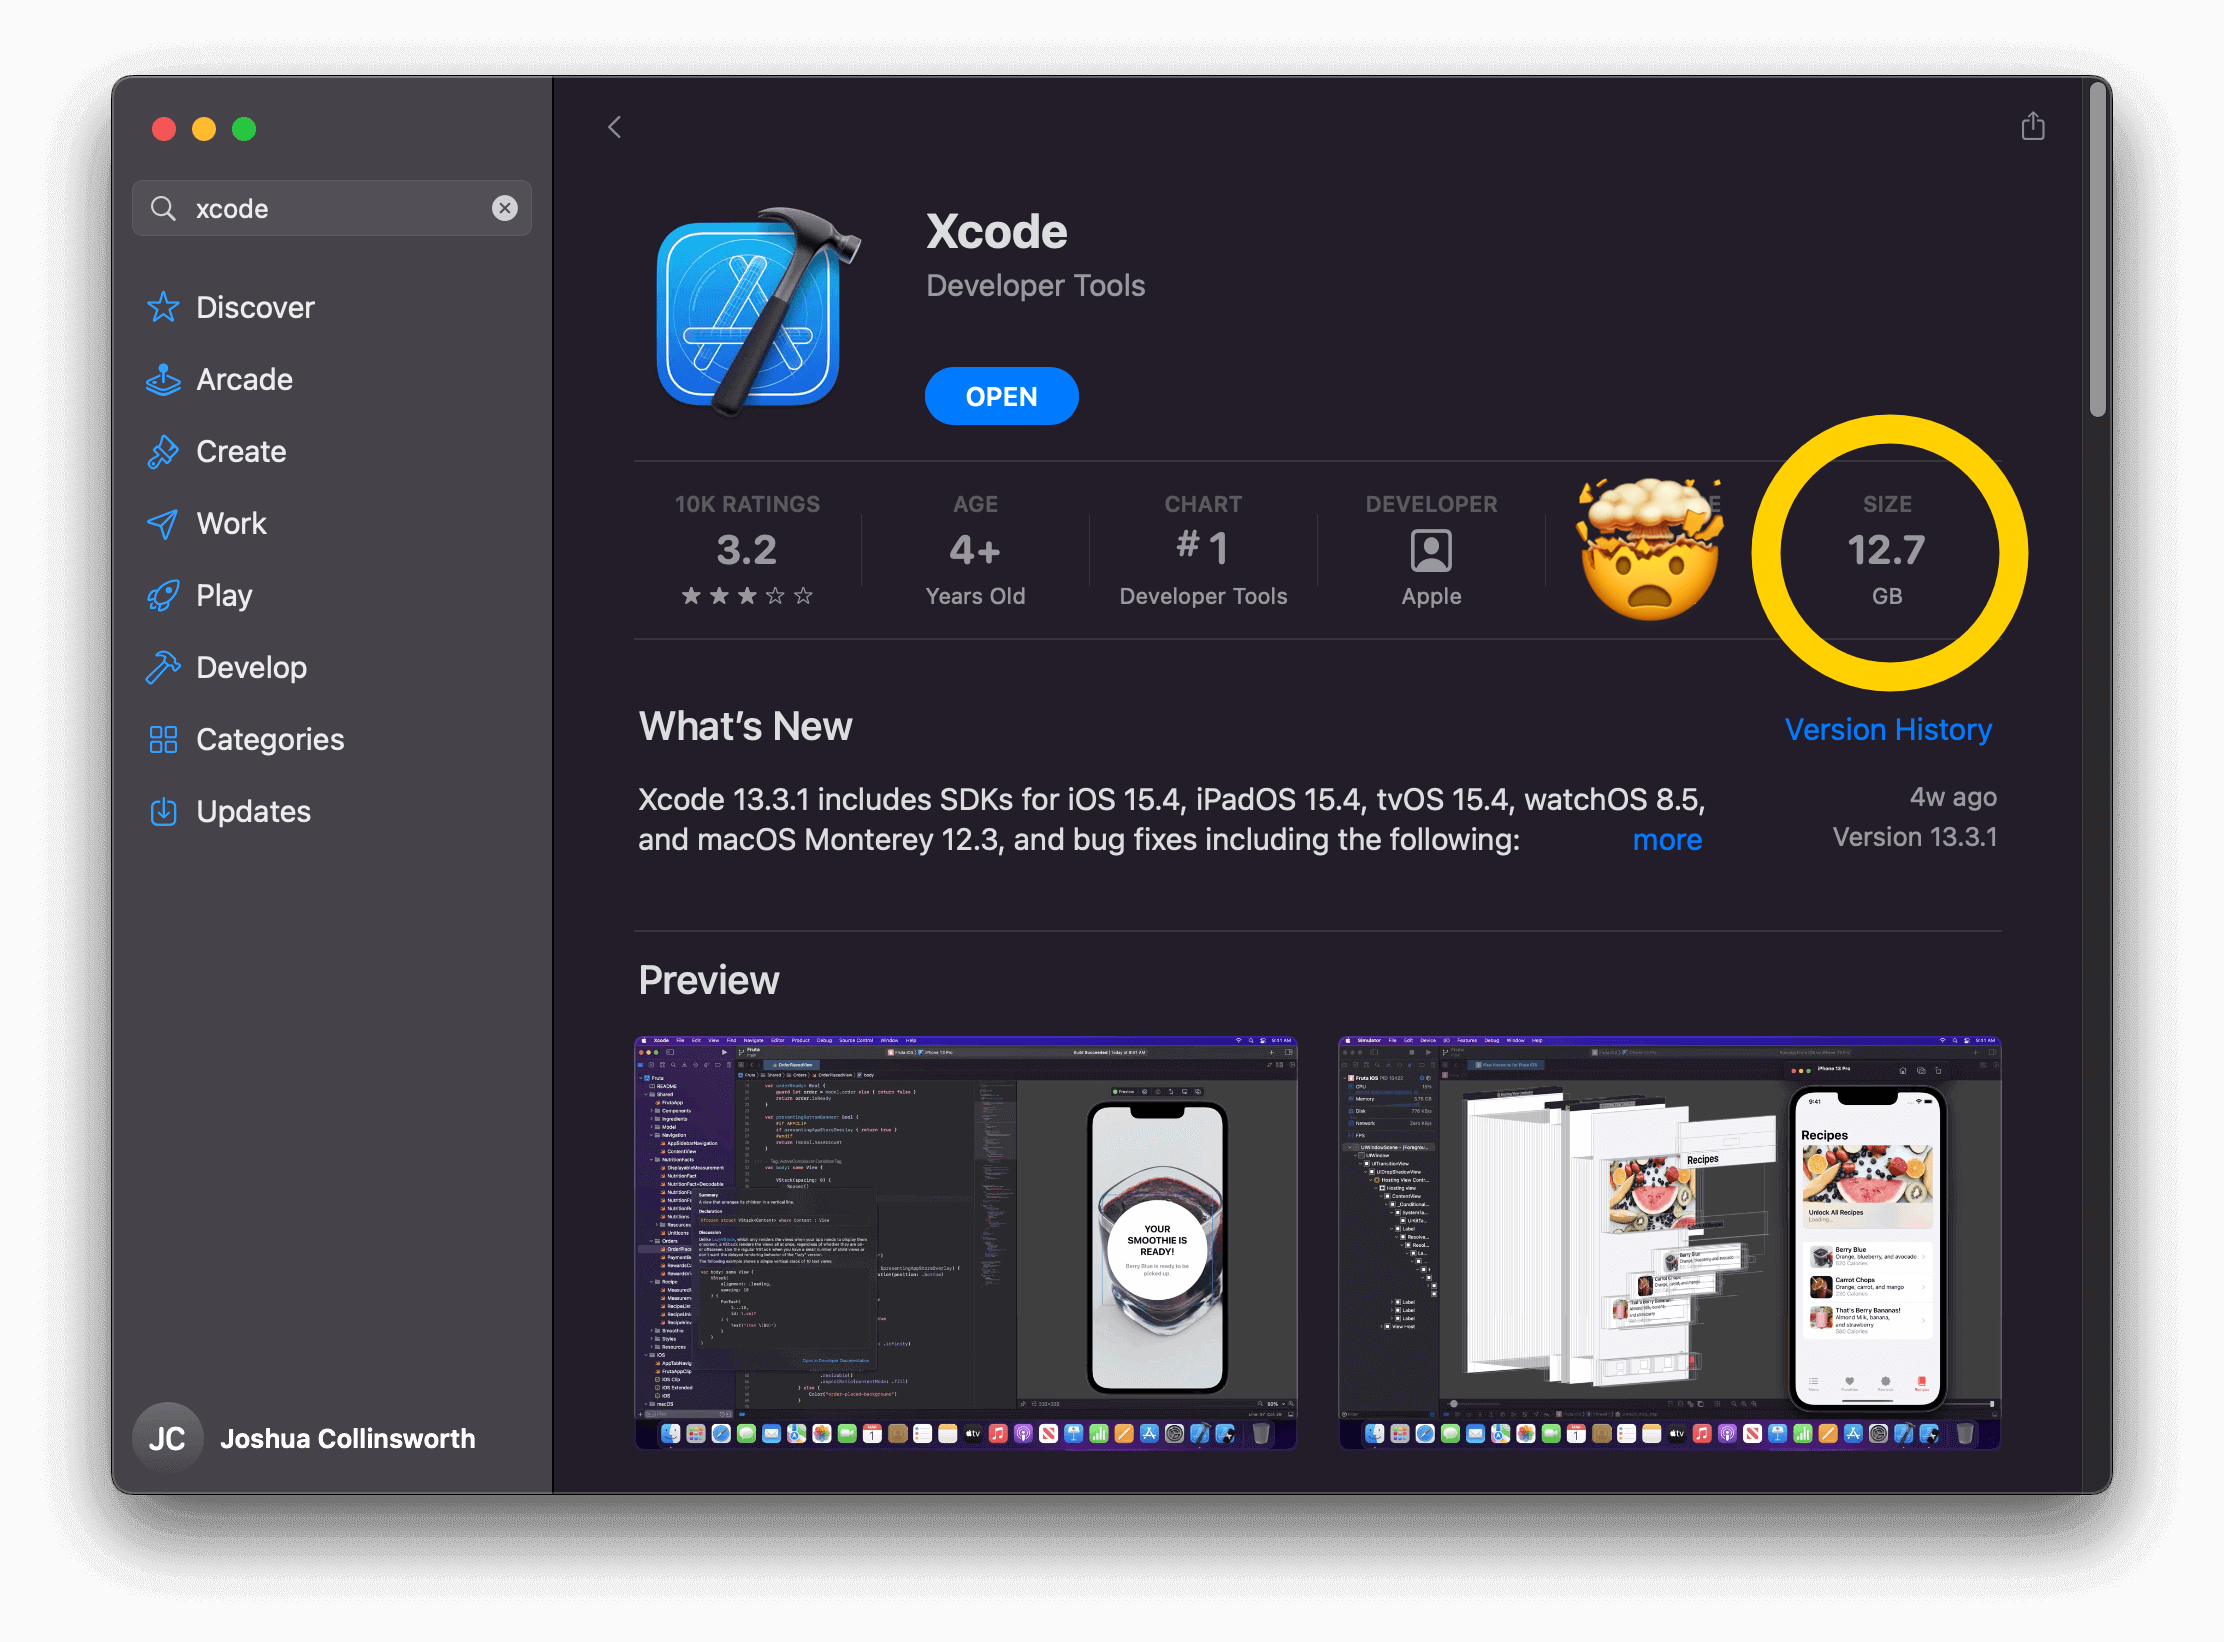 Search 'xcode' in the App Store and download Xcode from there